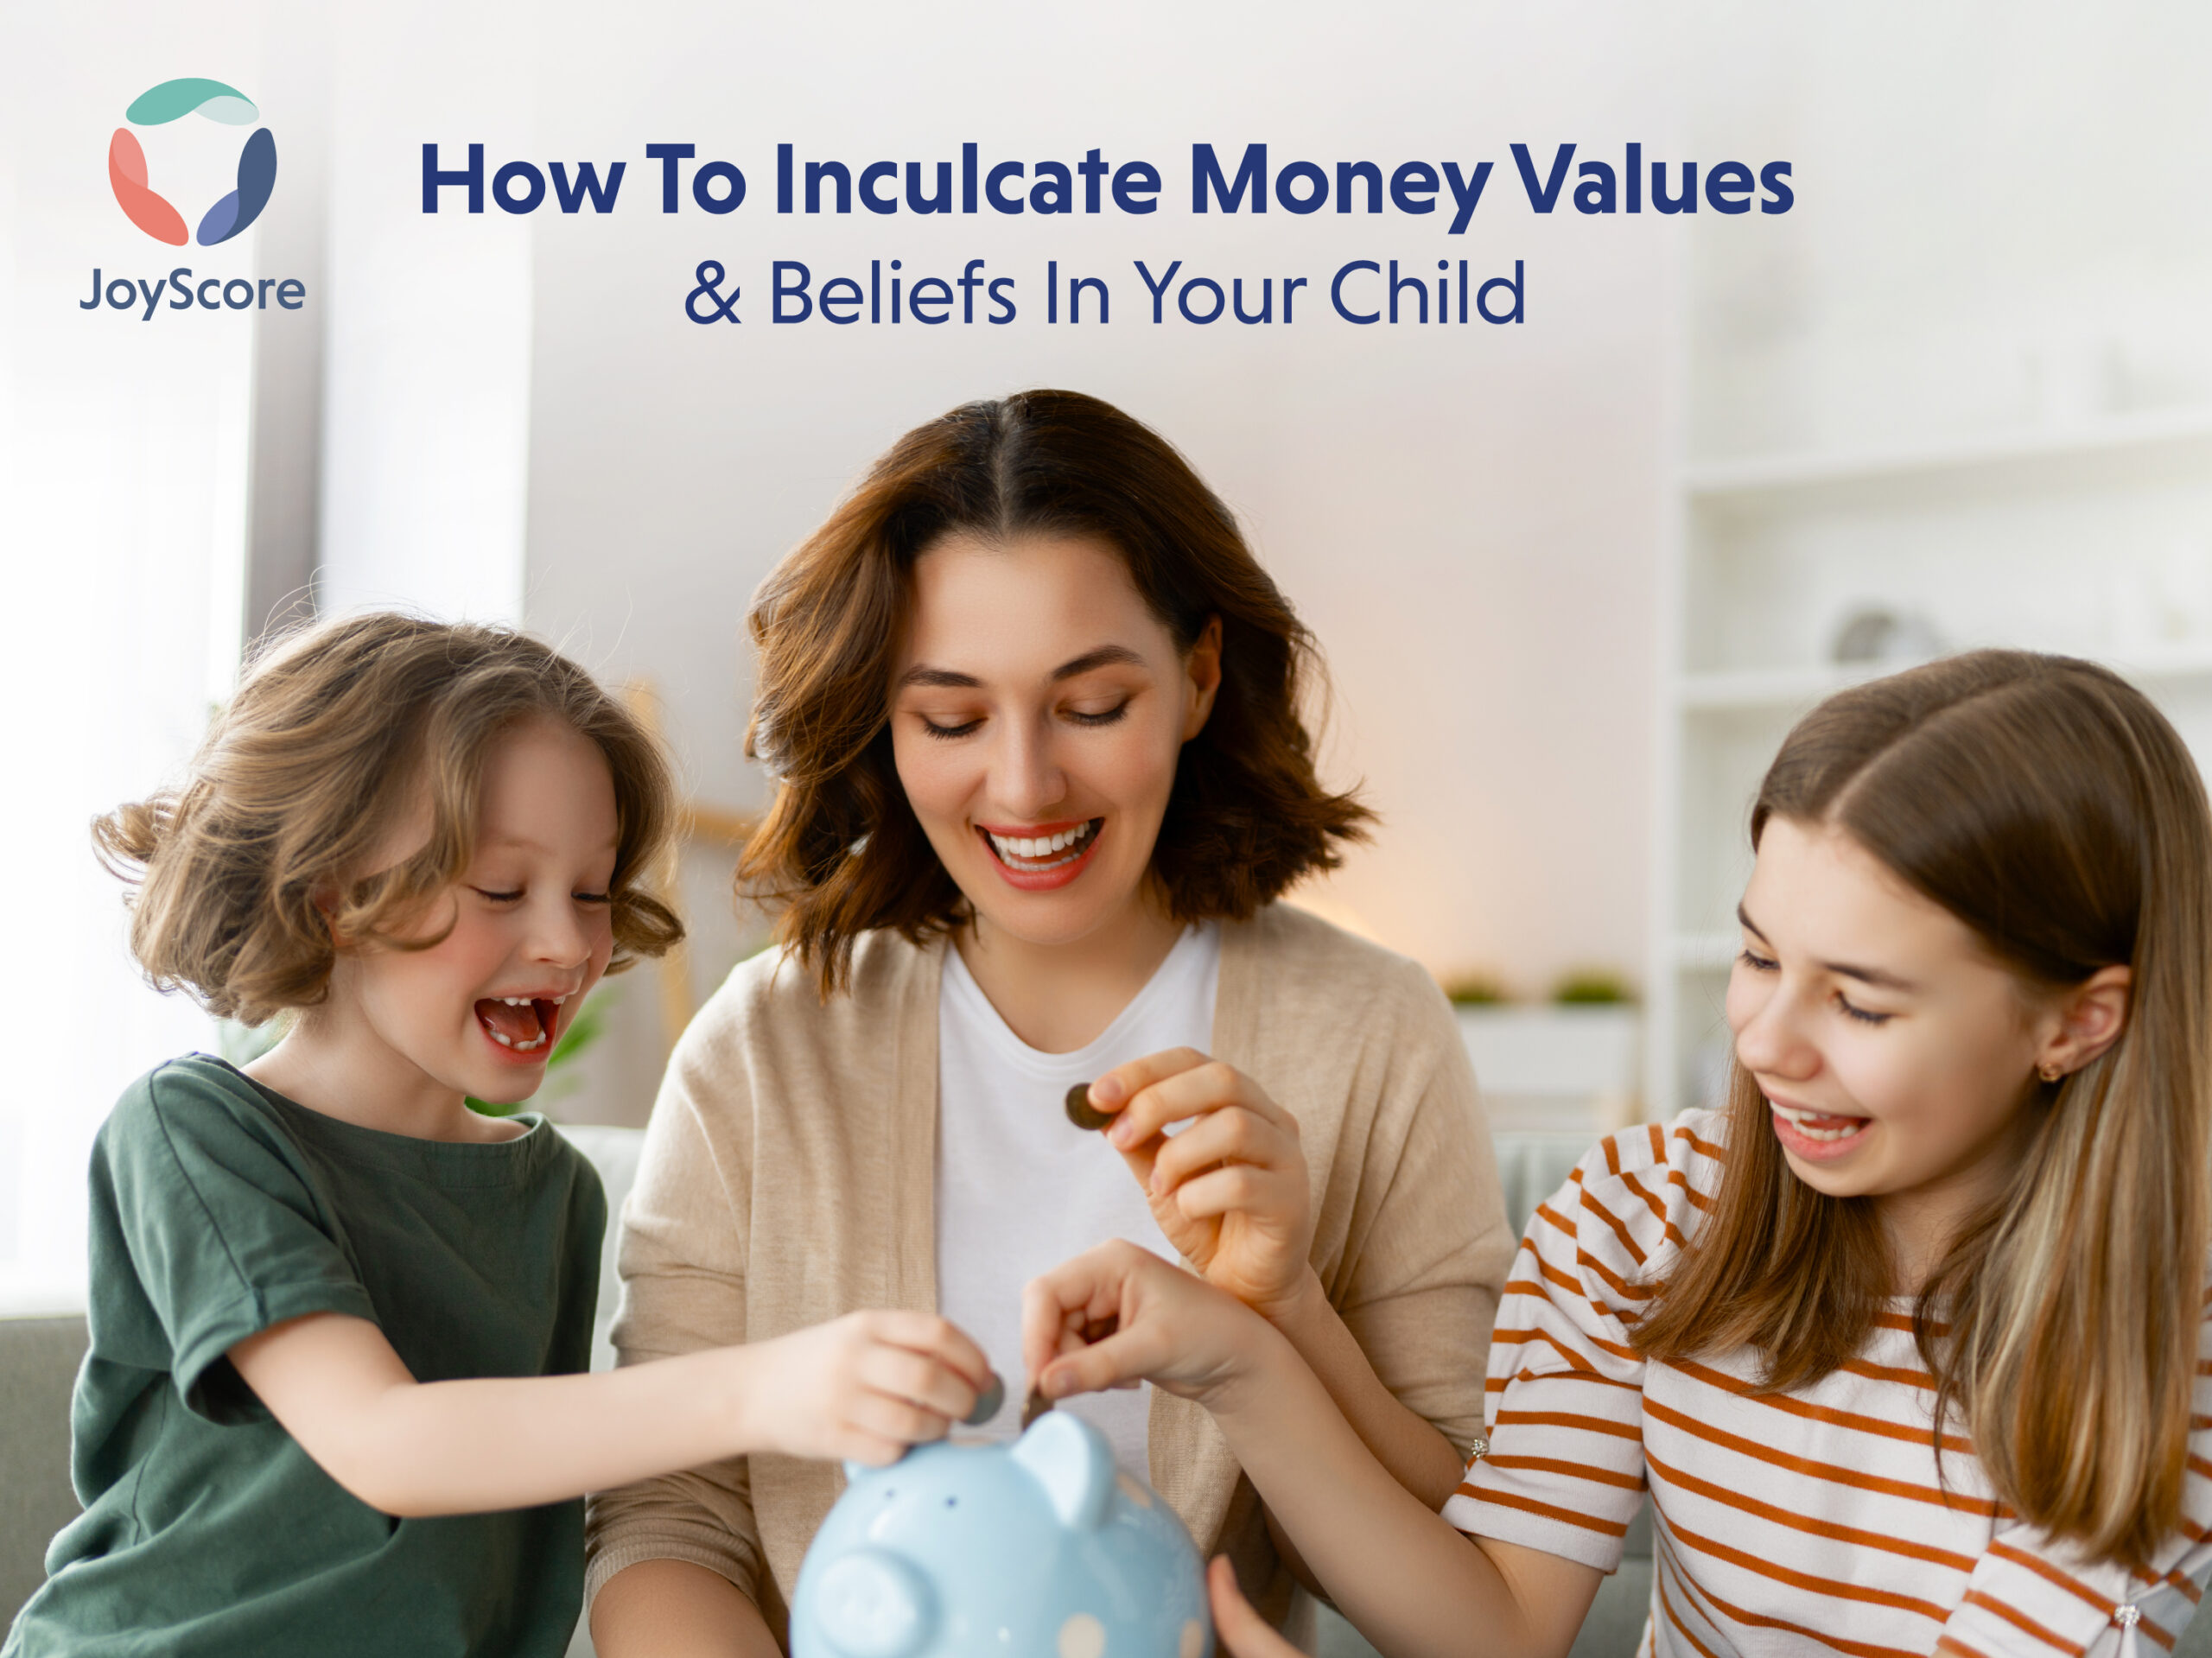 How to Inculcate Money Values and Beliefs in Your Child